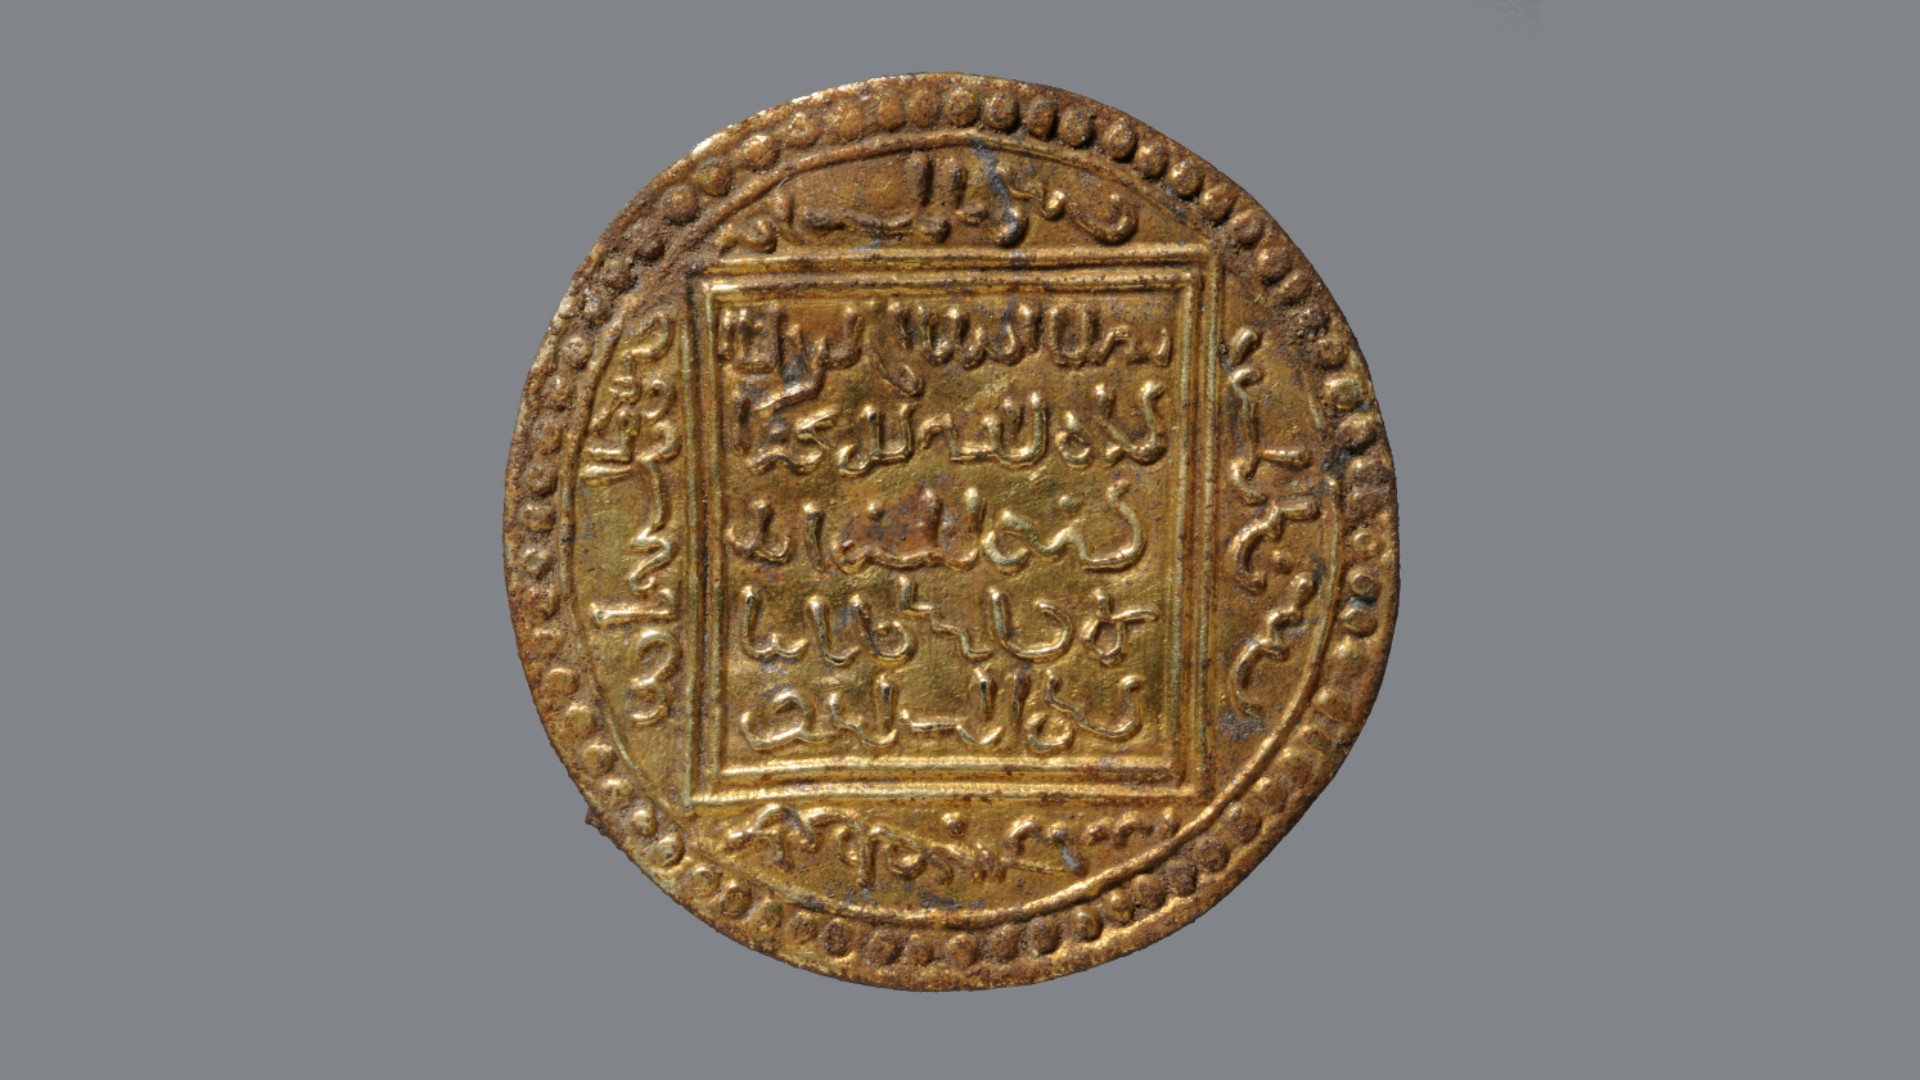 A gilded pseudo-coin fibula. This imitation Islamic coin was fashioned into a brooch.